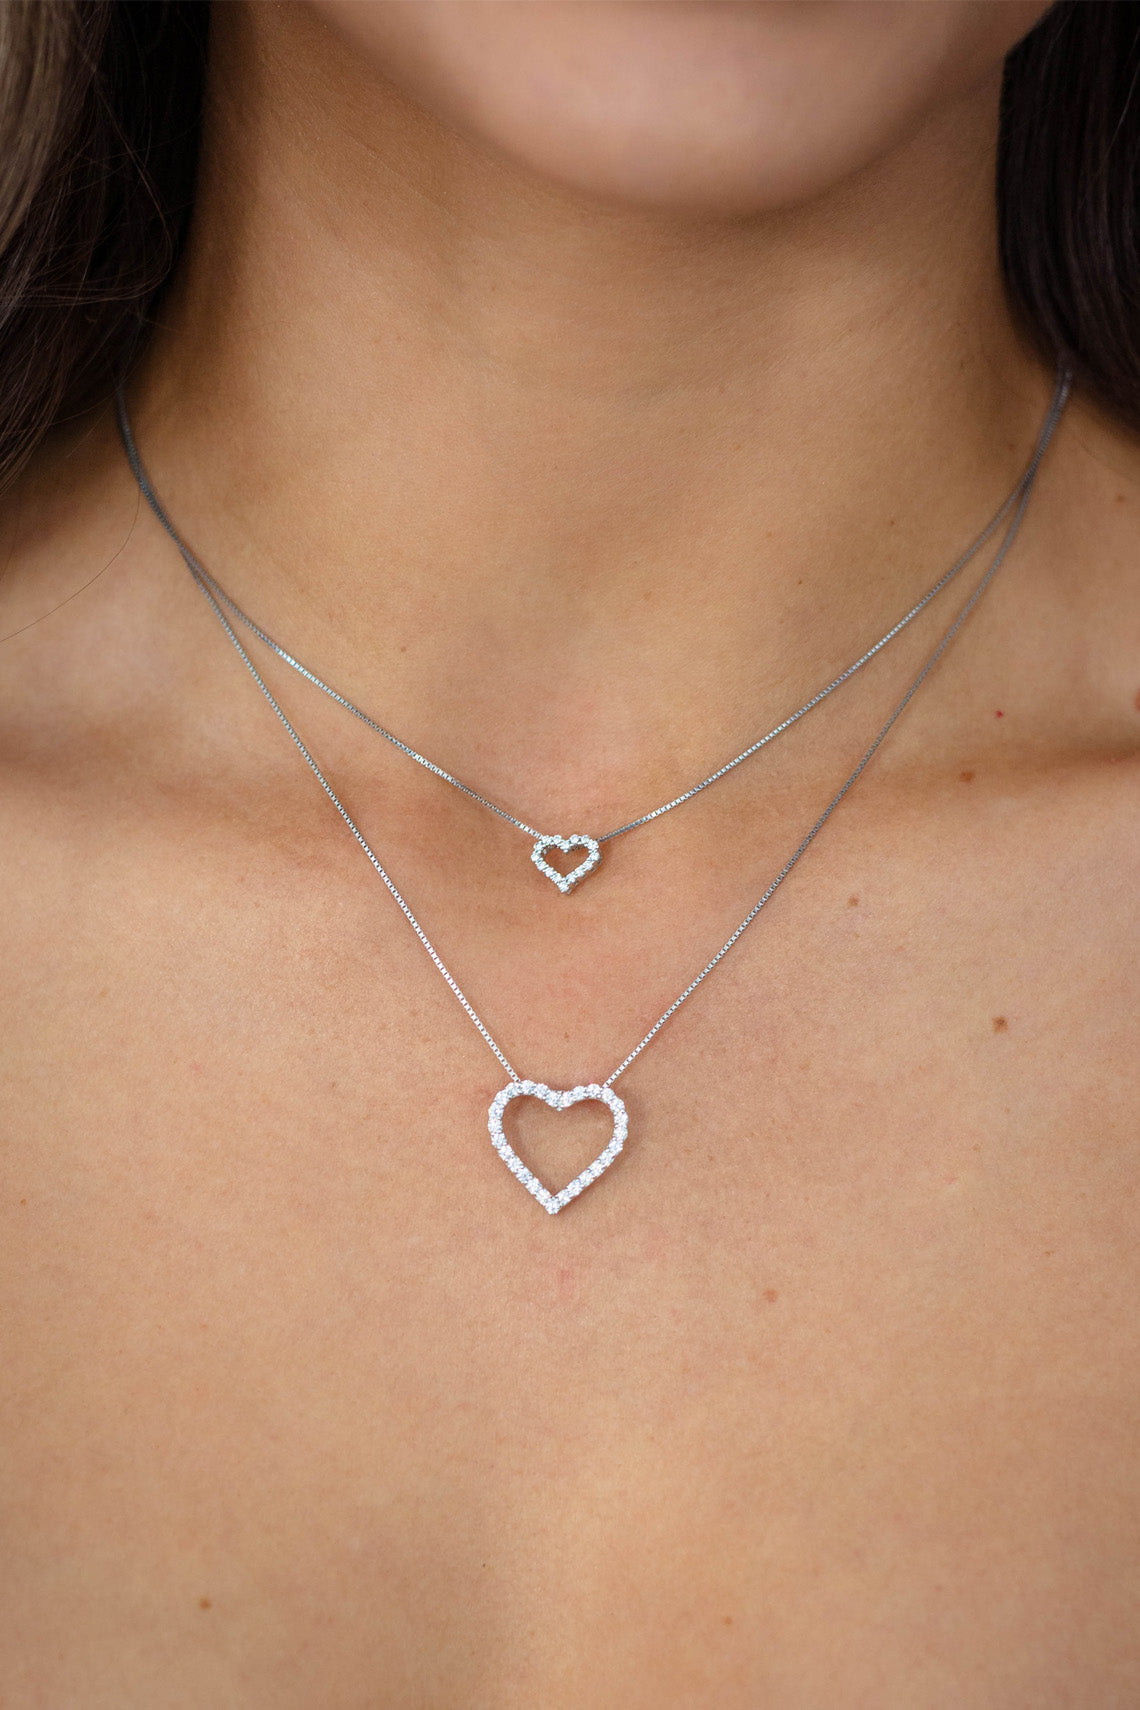 HEART 0.5TCW IN 9CT WHITE GOLD PENDANT